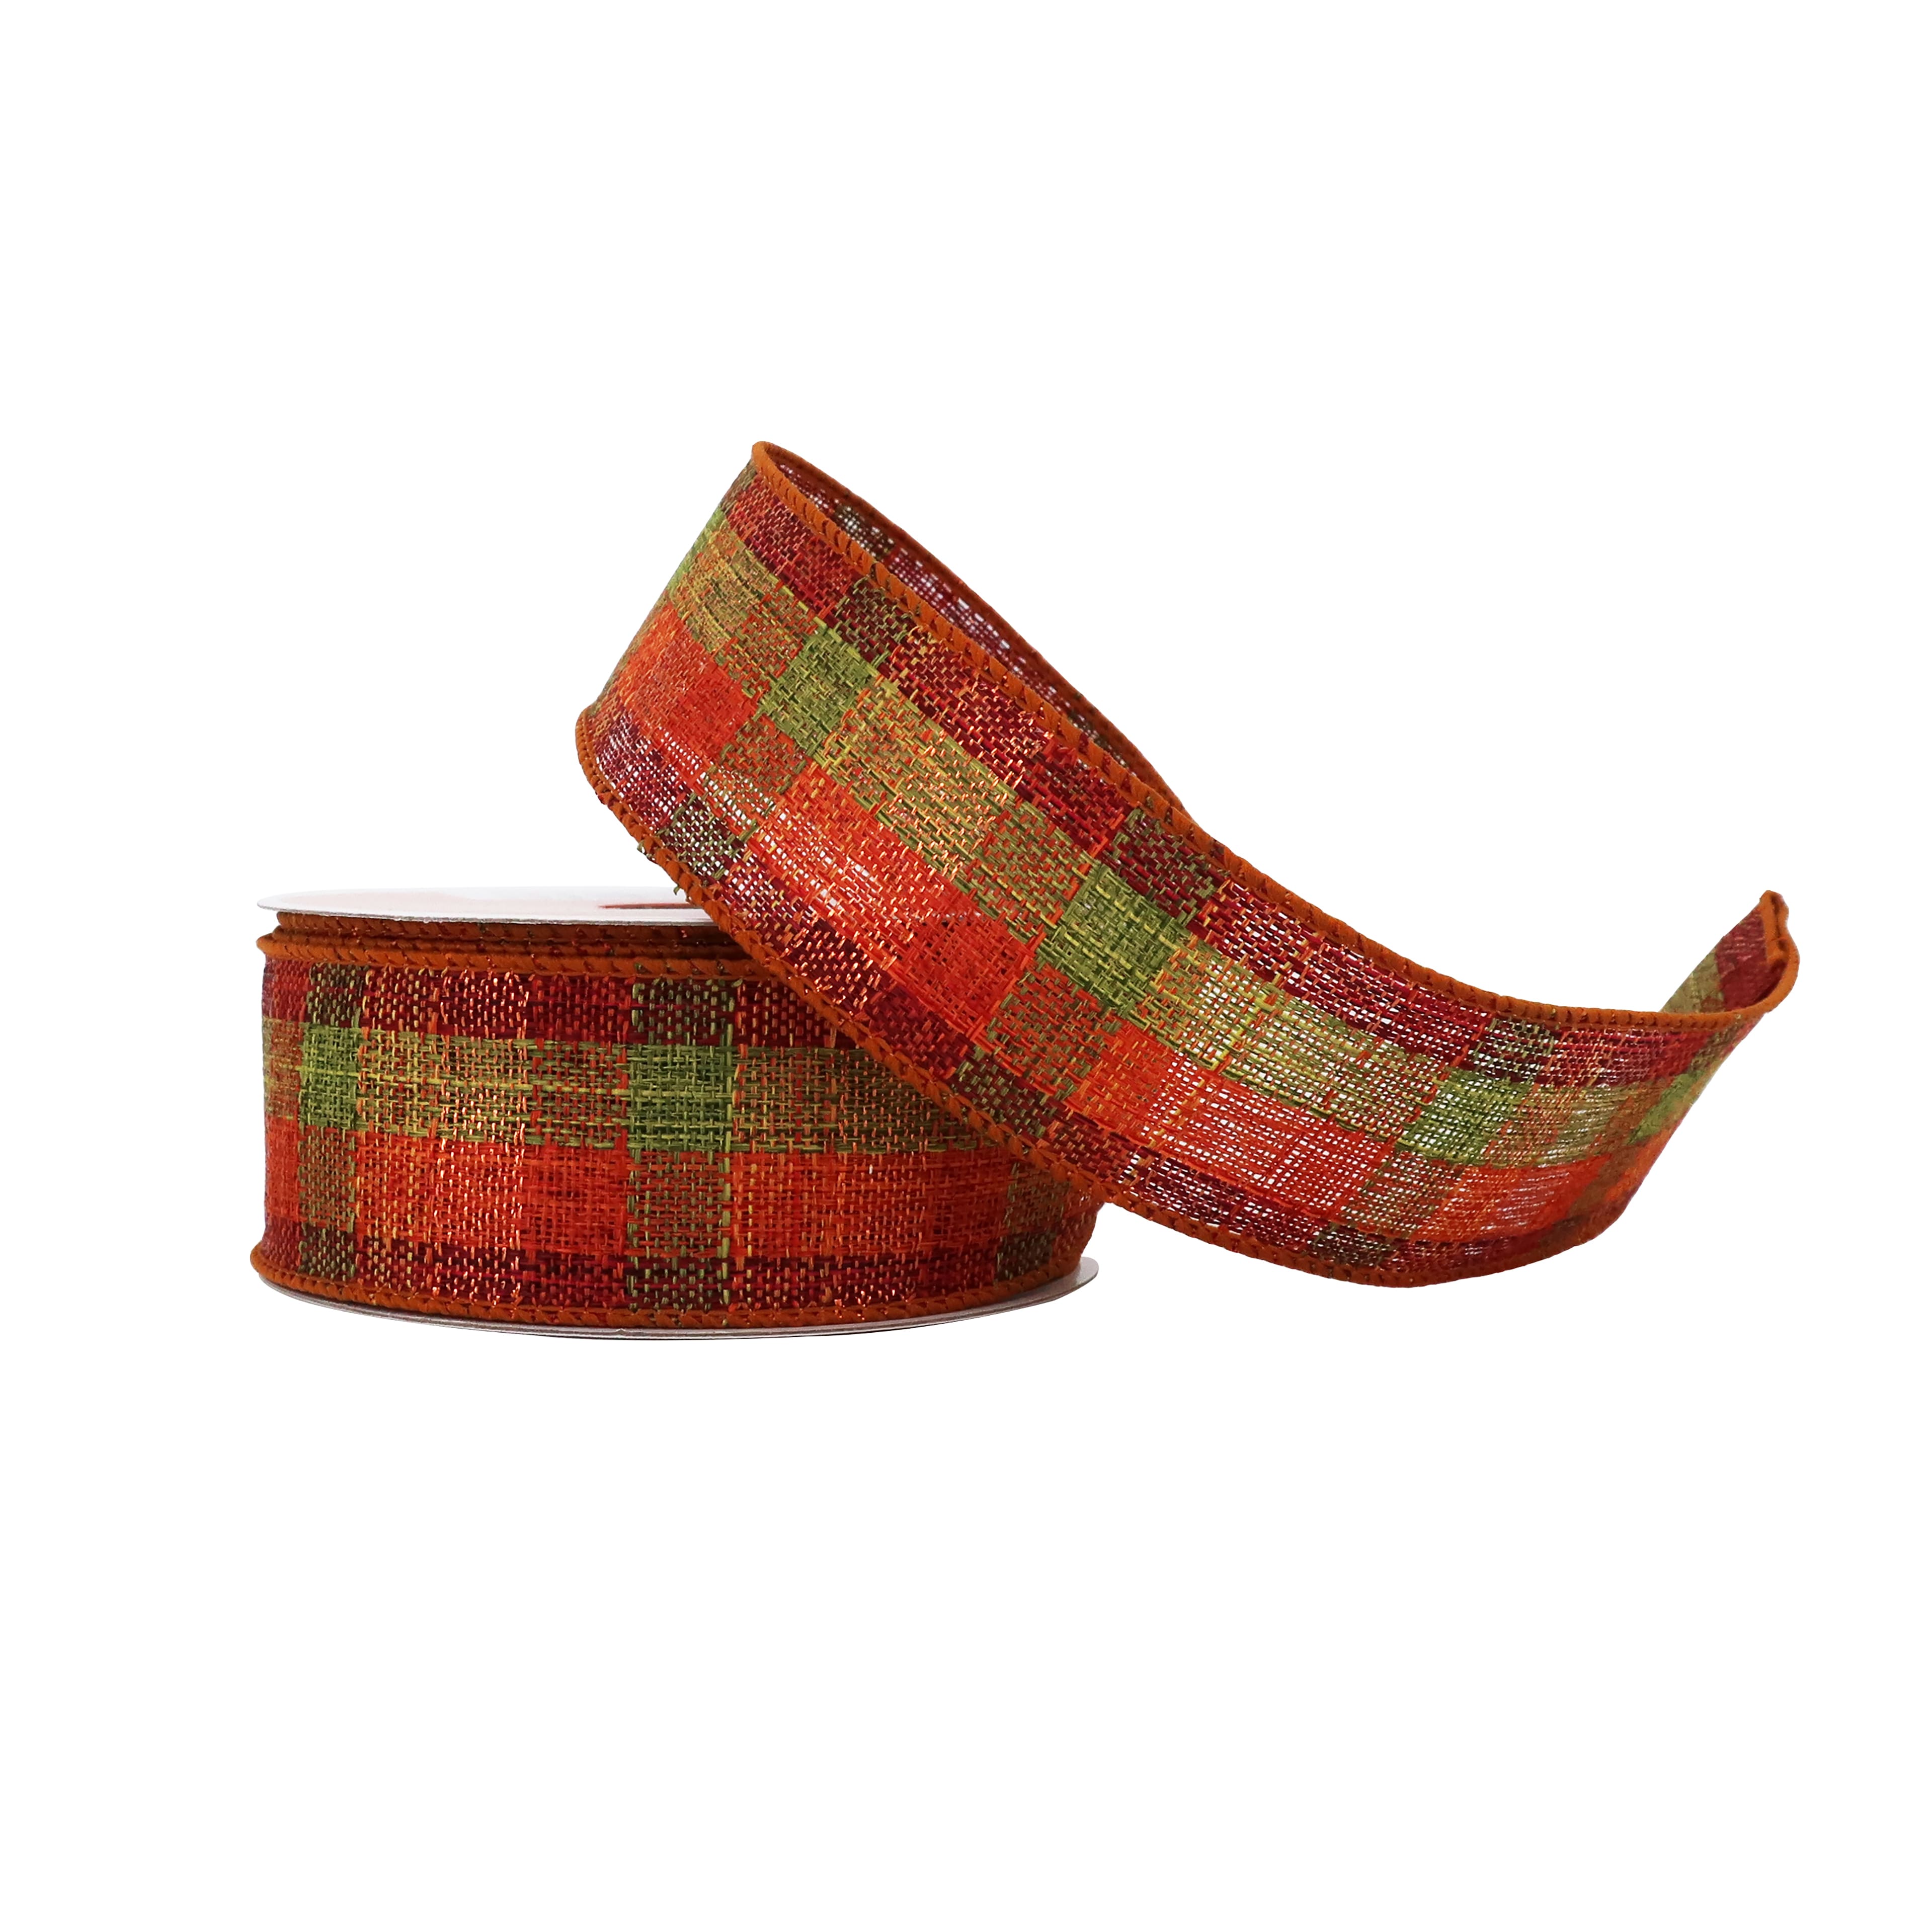 1.5&#x22; x 30ft. Plaid Wired Ribbon by Celebrate It&#xAE; Fall